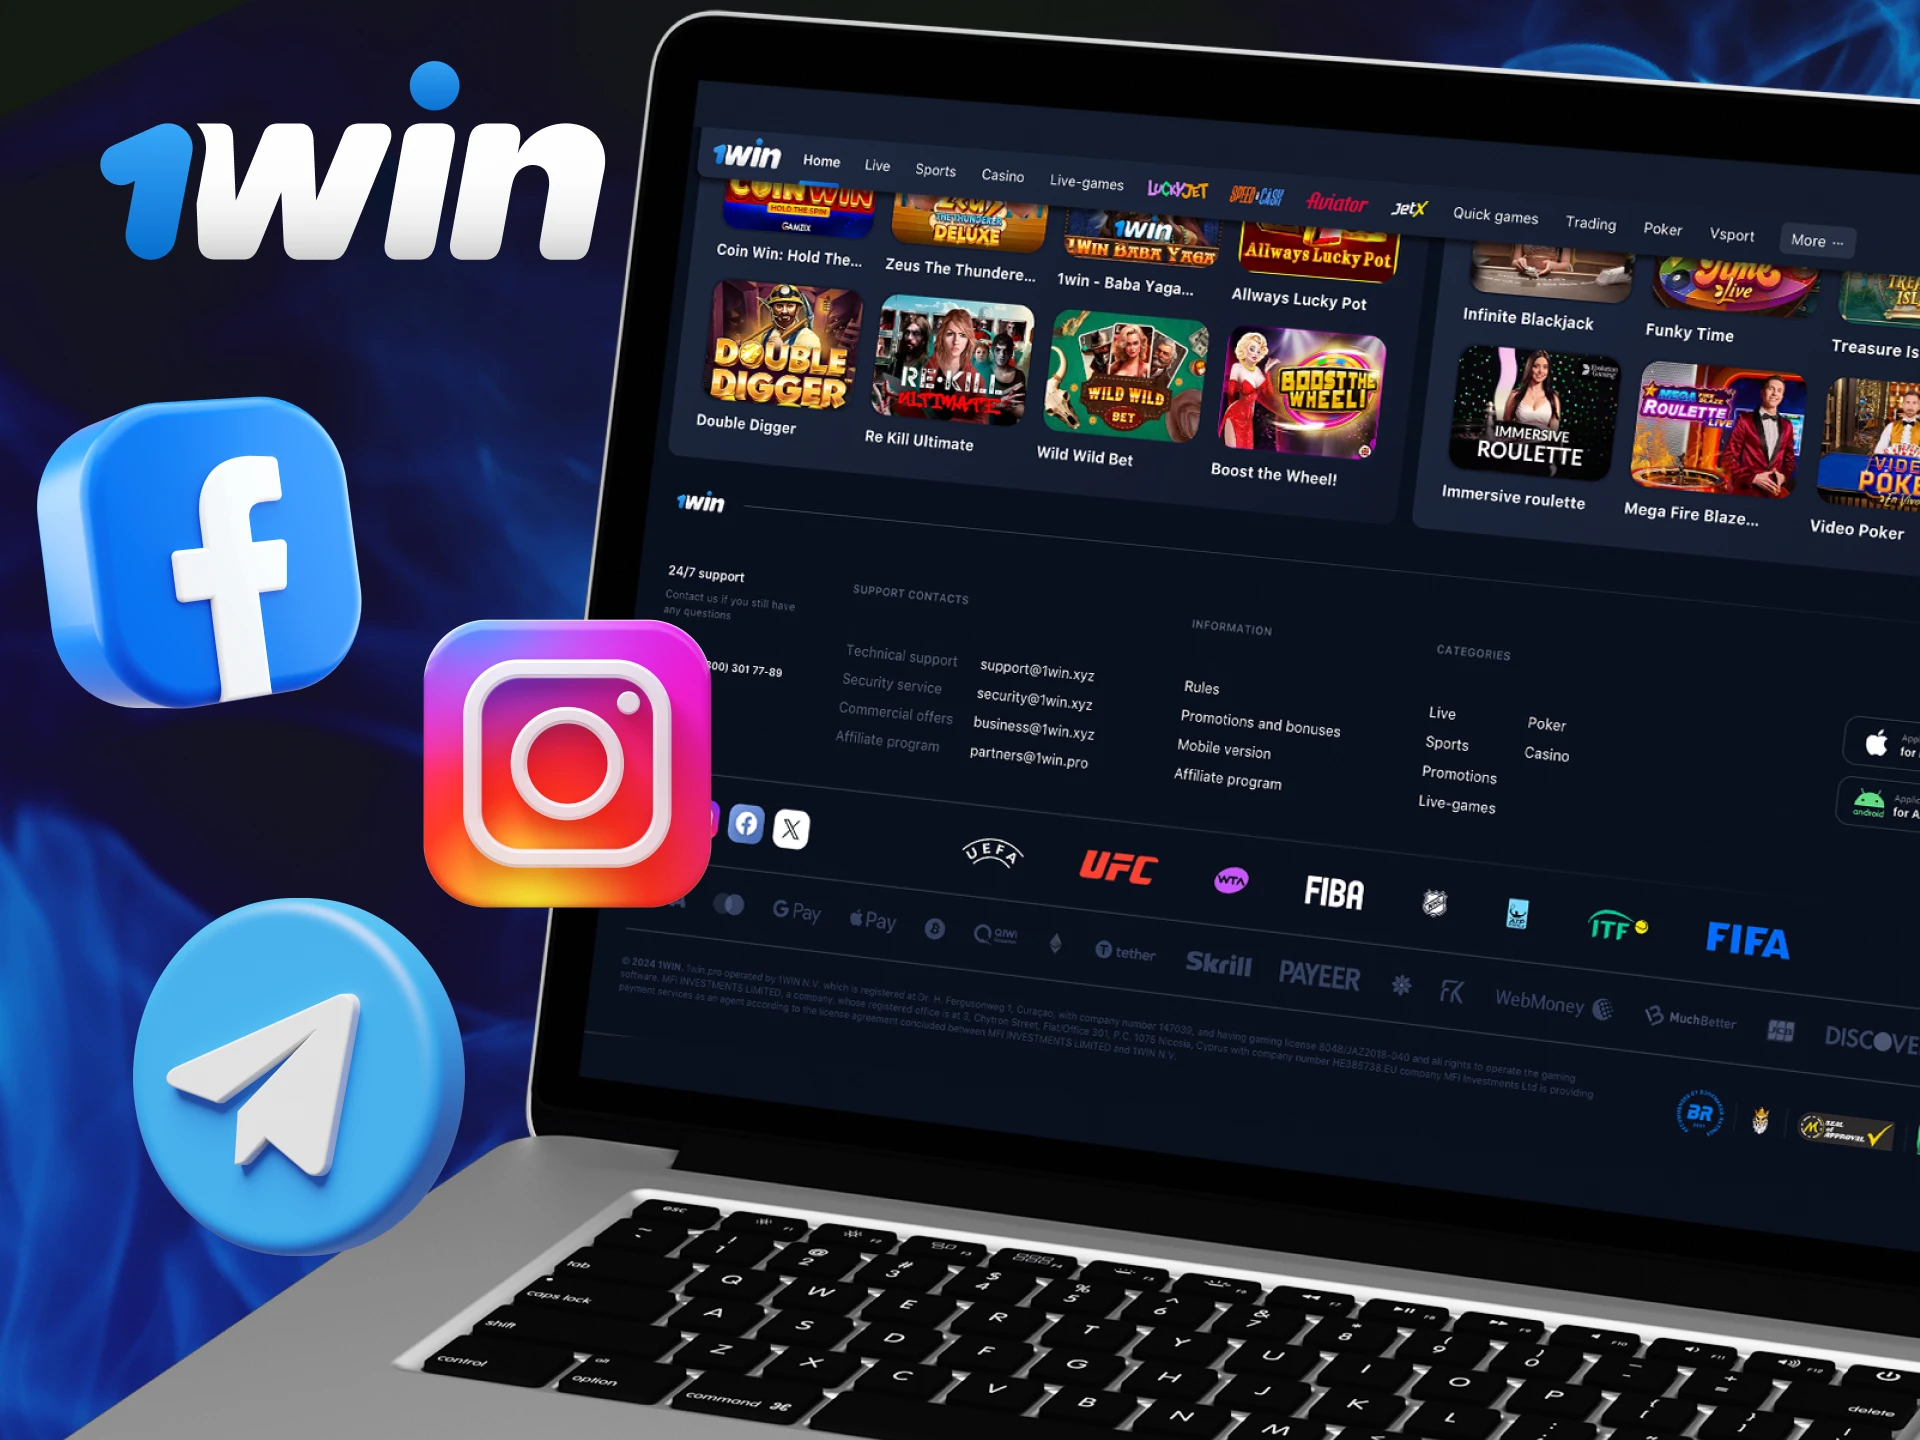 What social networks can you find 1win casino on.